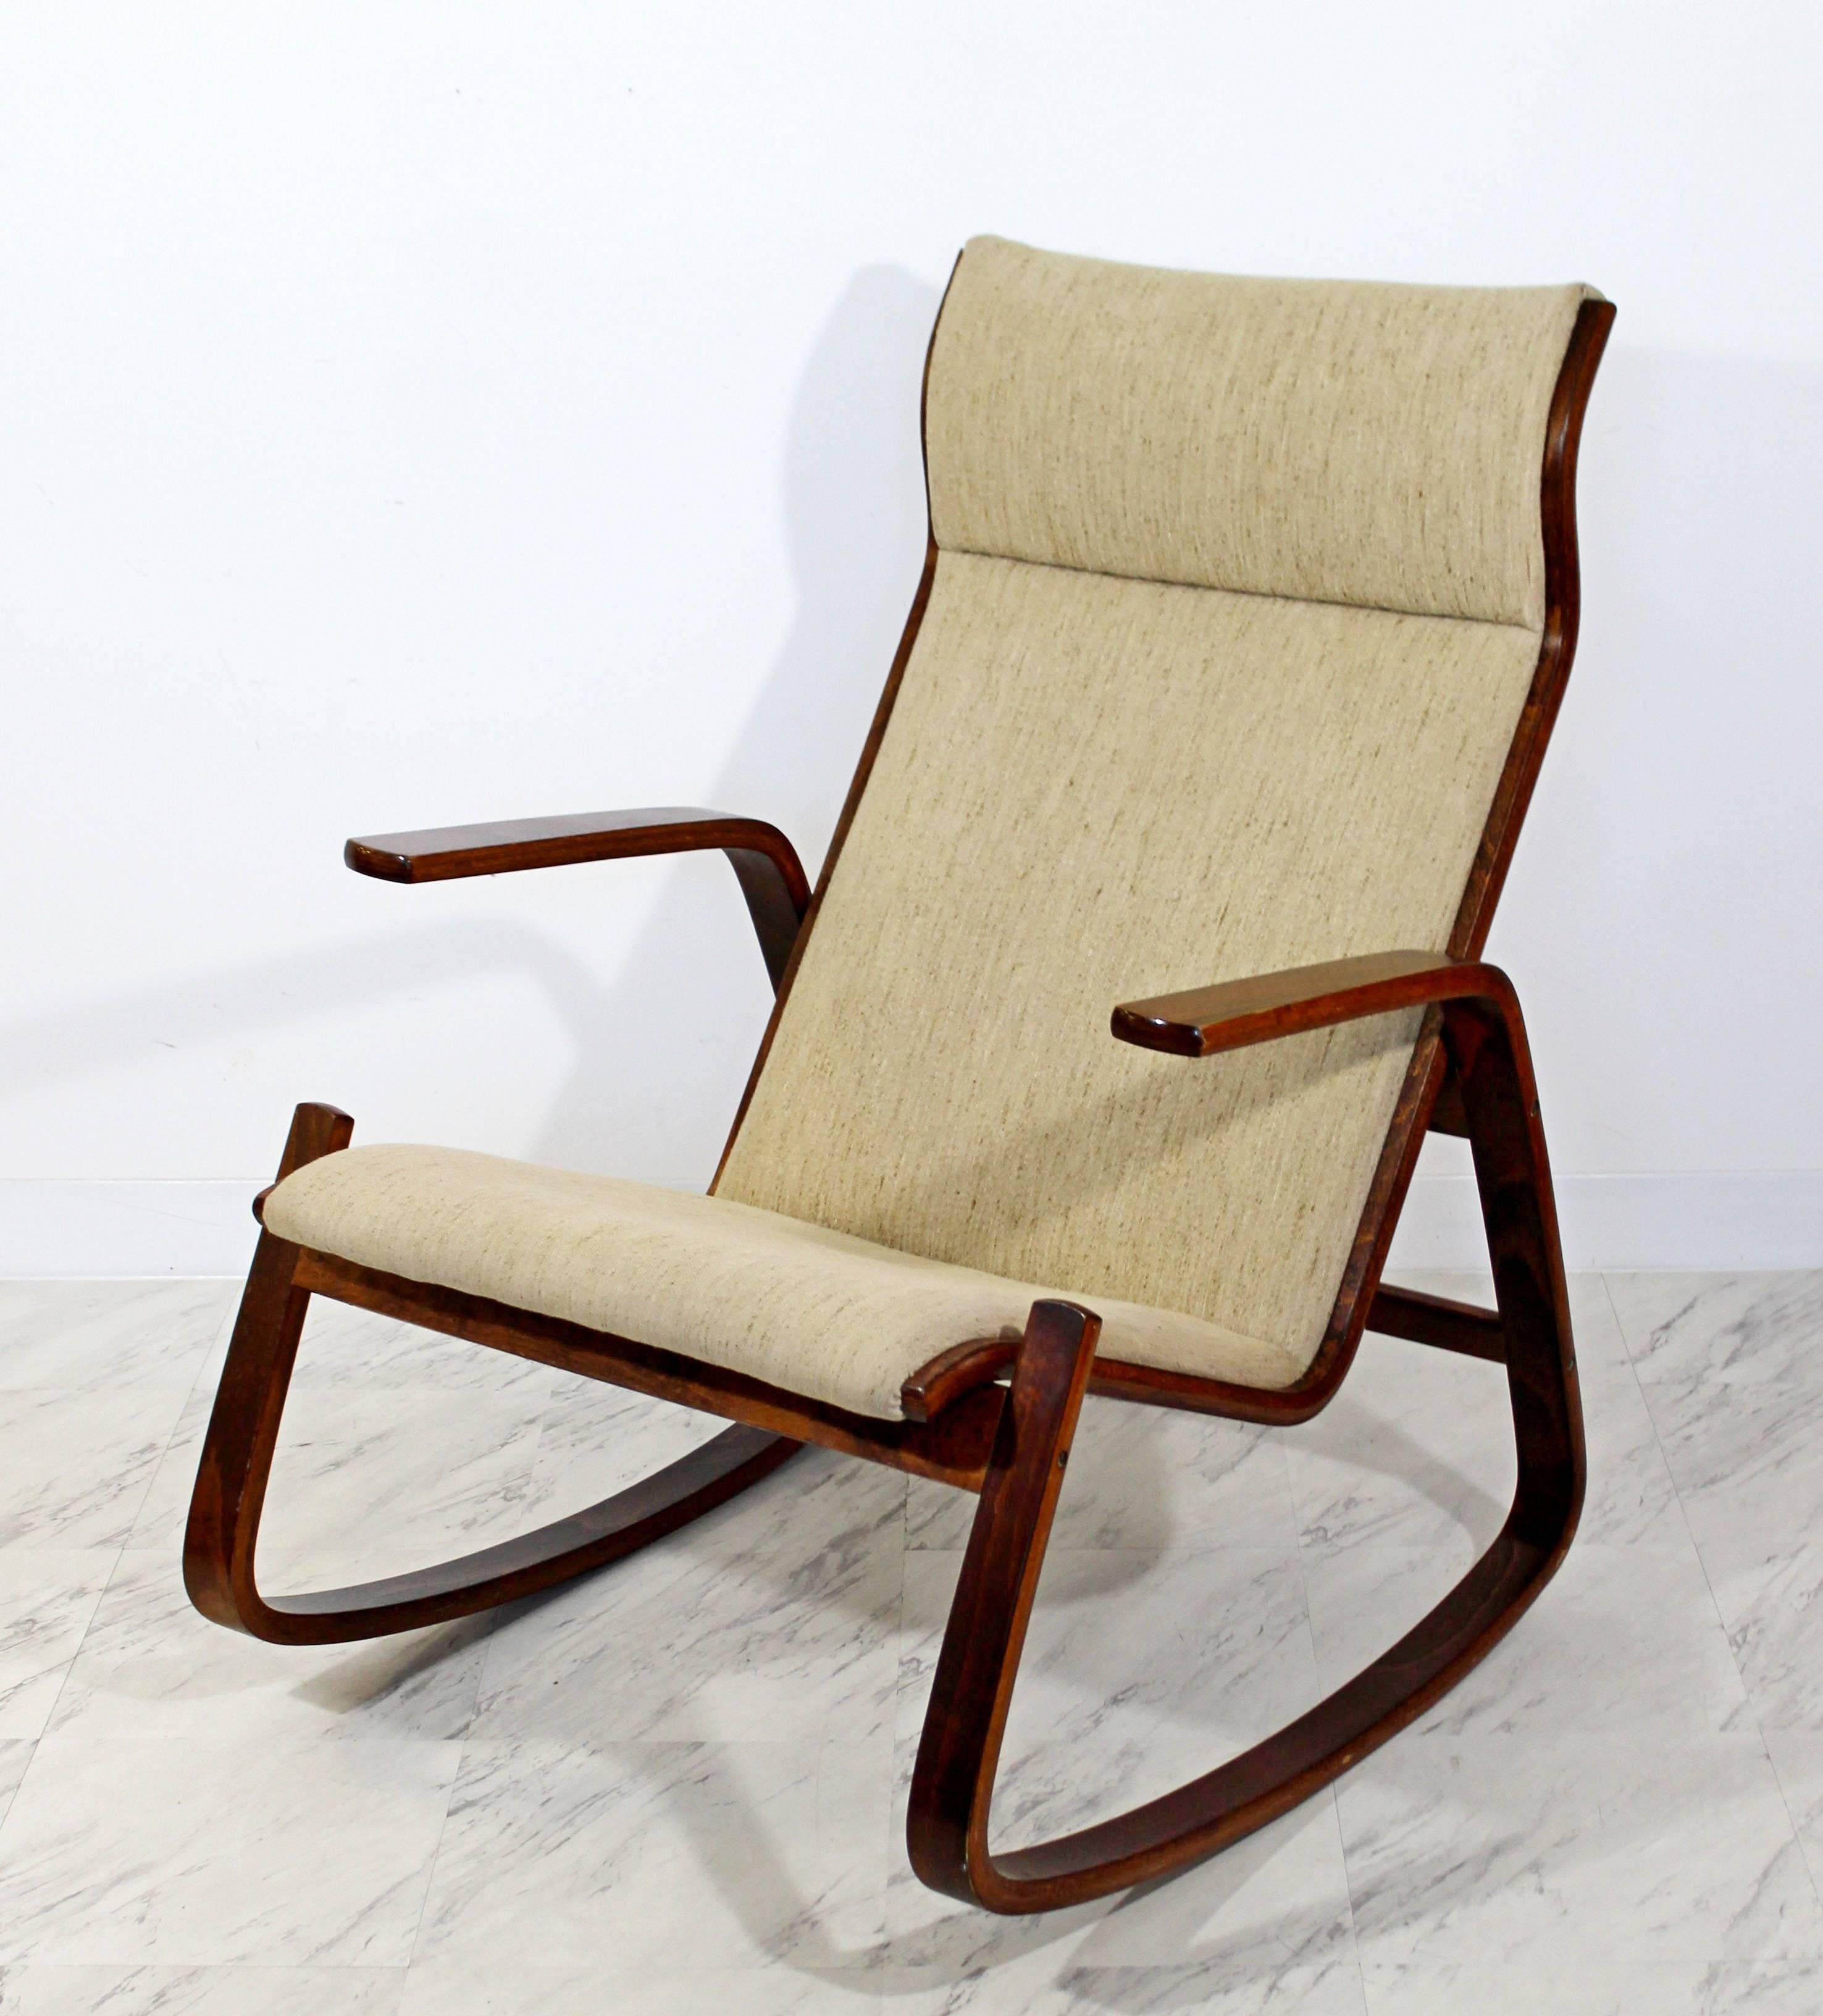 For your consideration is a gorgeous, bentwood, rocking chair by Ingmar Relling for Norwegian company Westnofa, circa 1960s. In excellent condition. The dimensions are W-28.5" x D-32" x B.H.-39" S.H.-17".
 